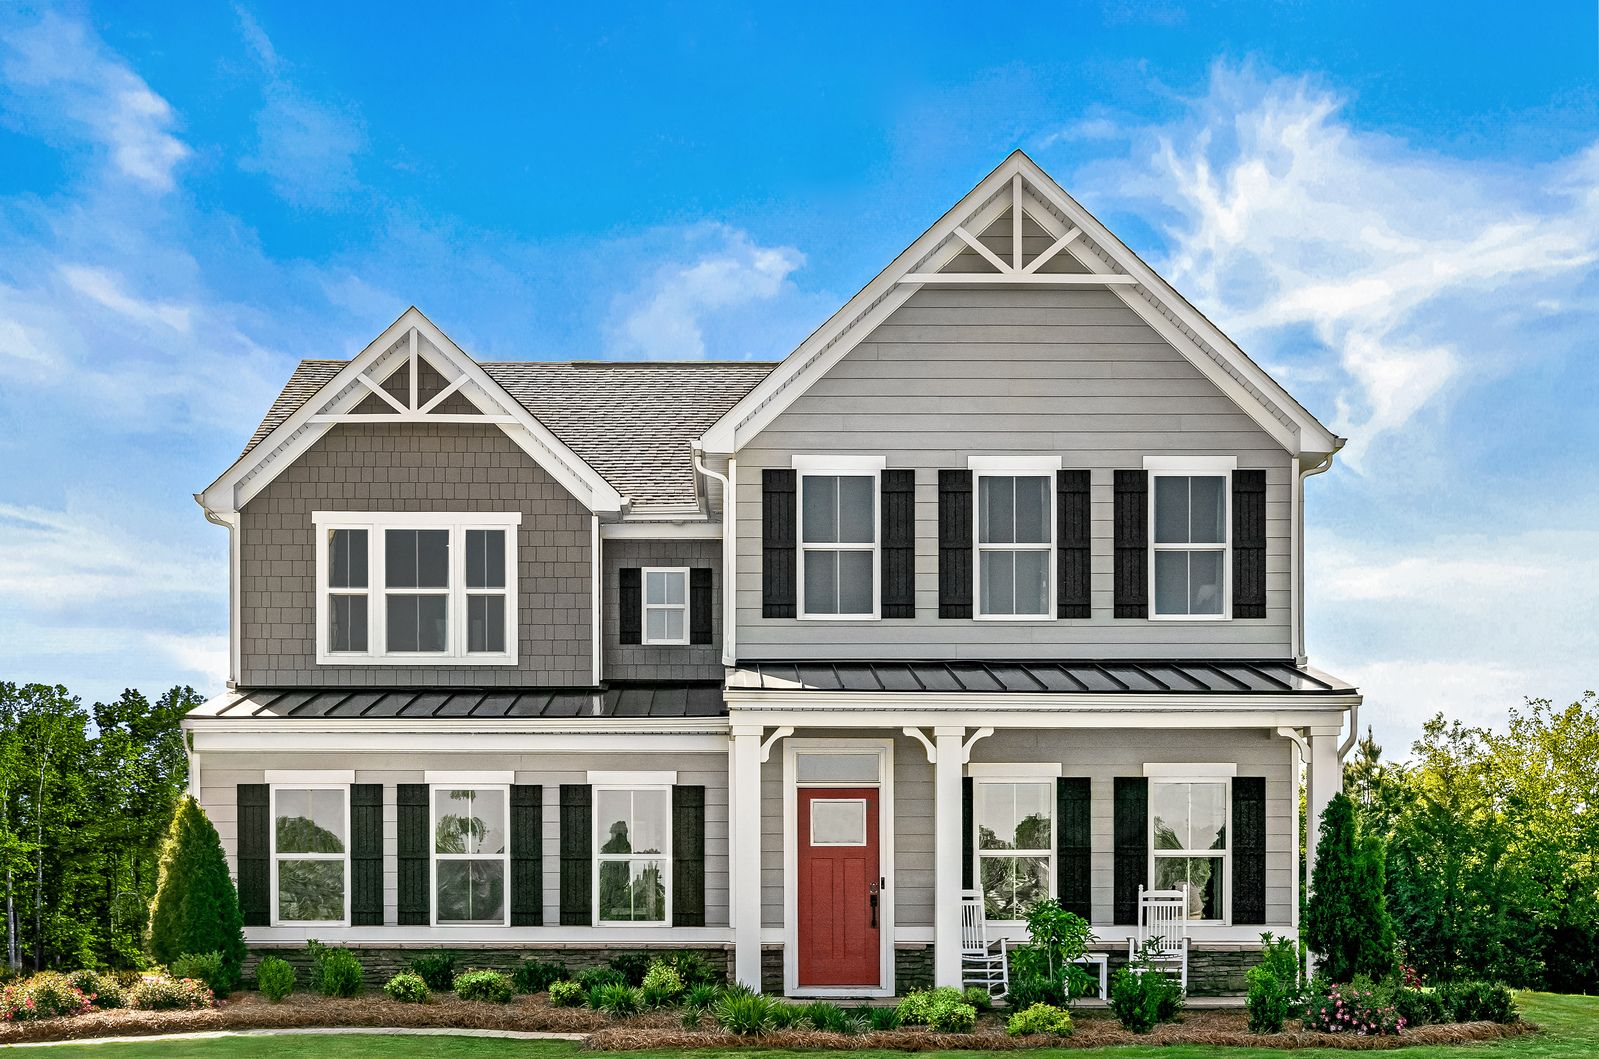 RYAN HOMES AT FAWN LAKE - THE PREMIER GATED COMMUNITY IN THE FREDERICKSBURG AREA